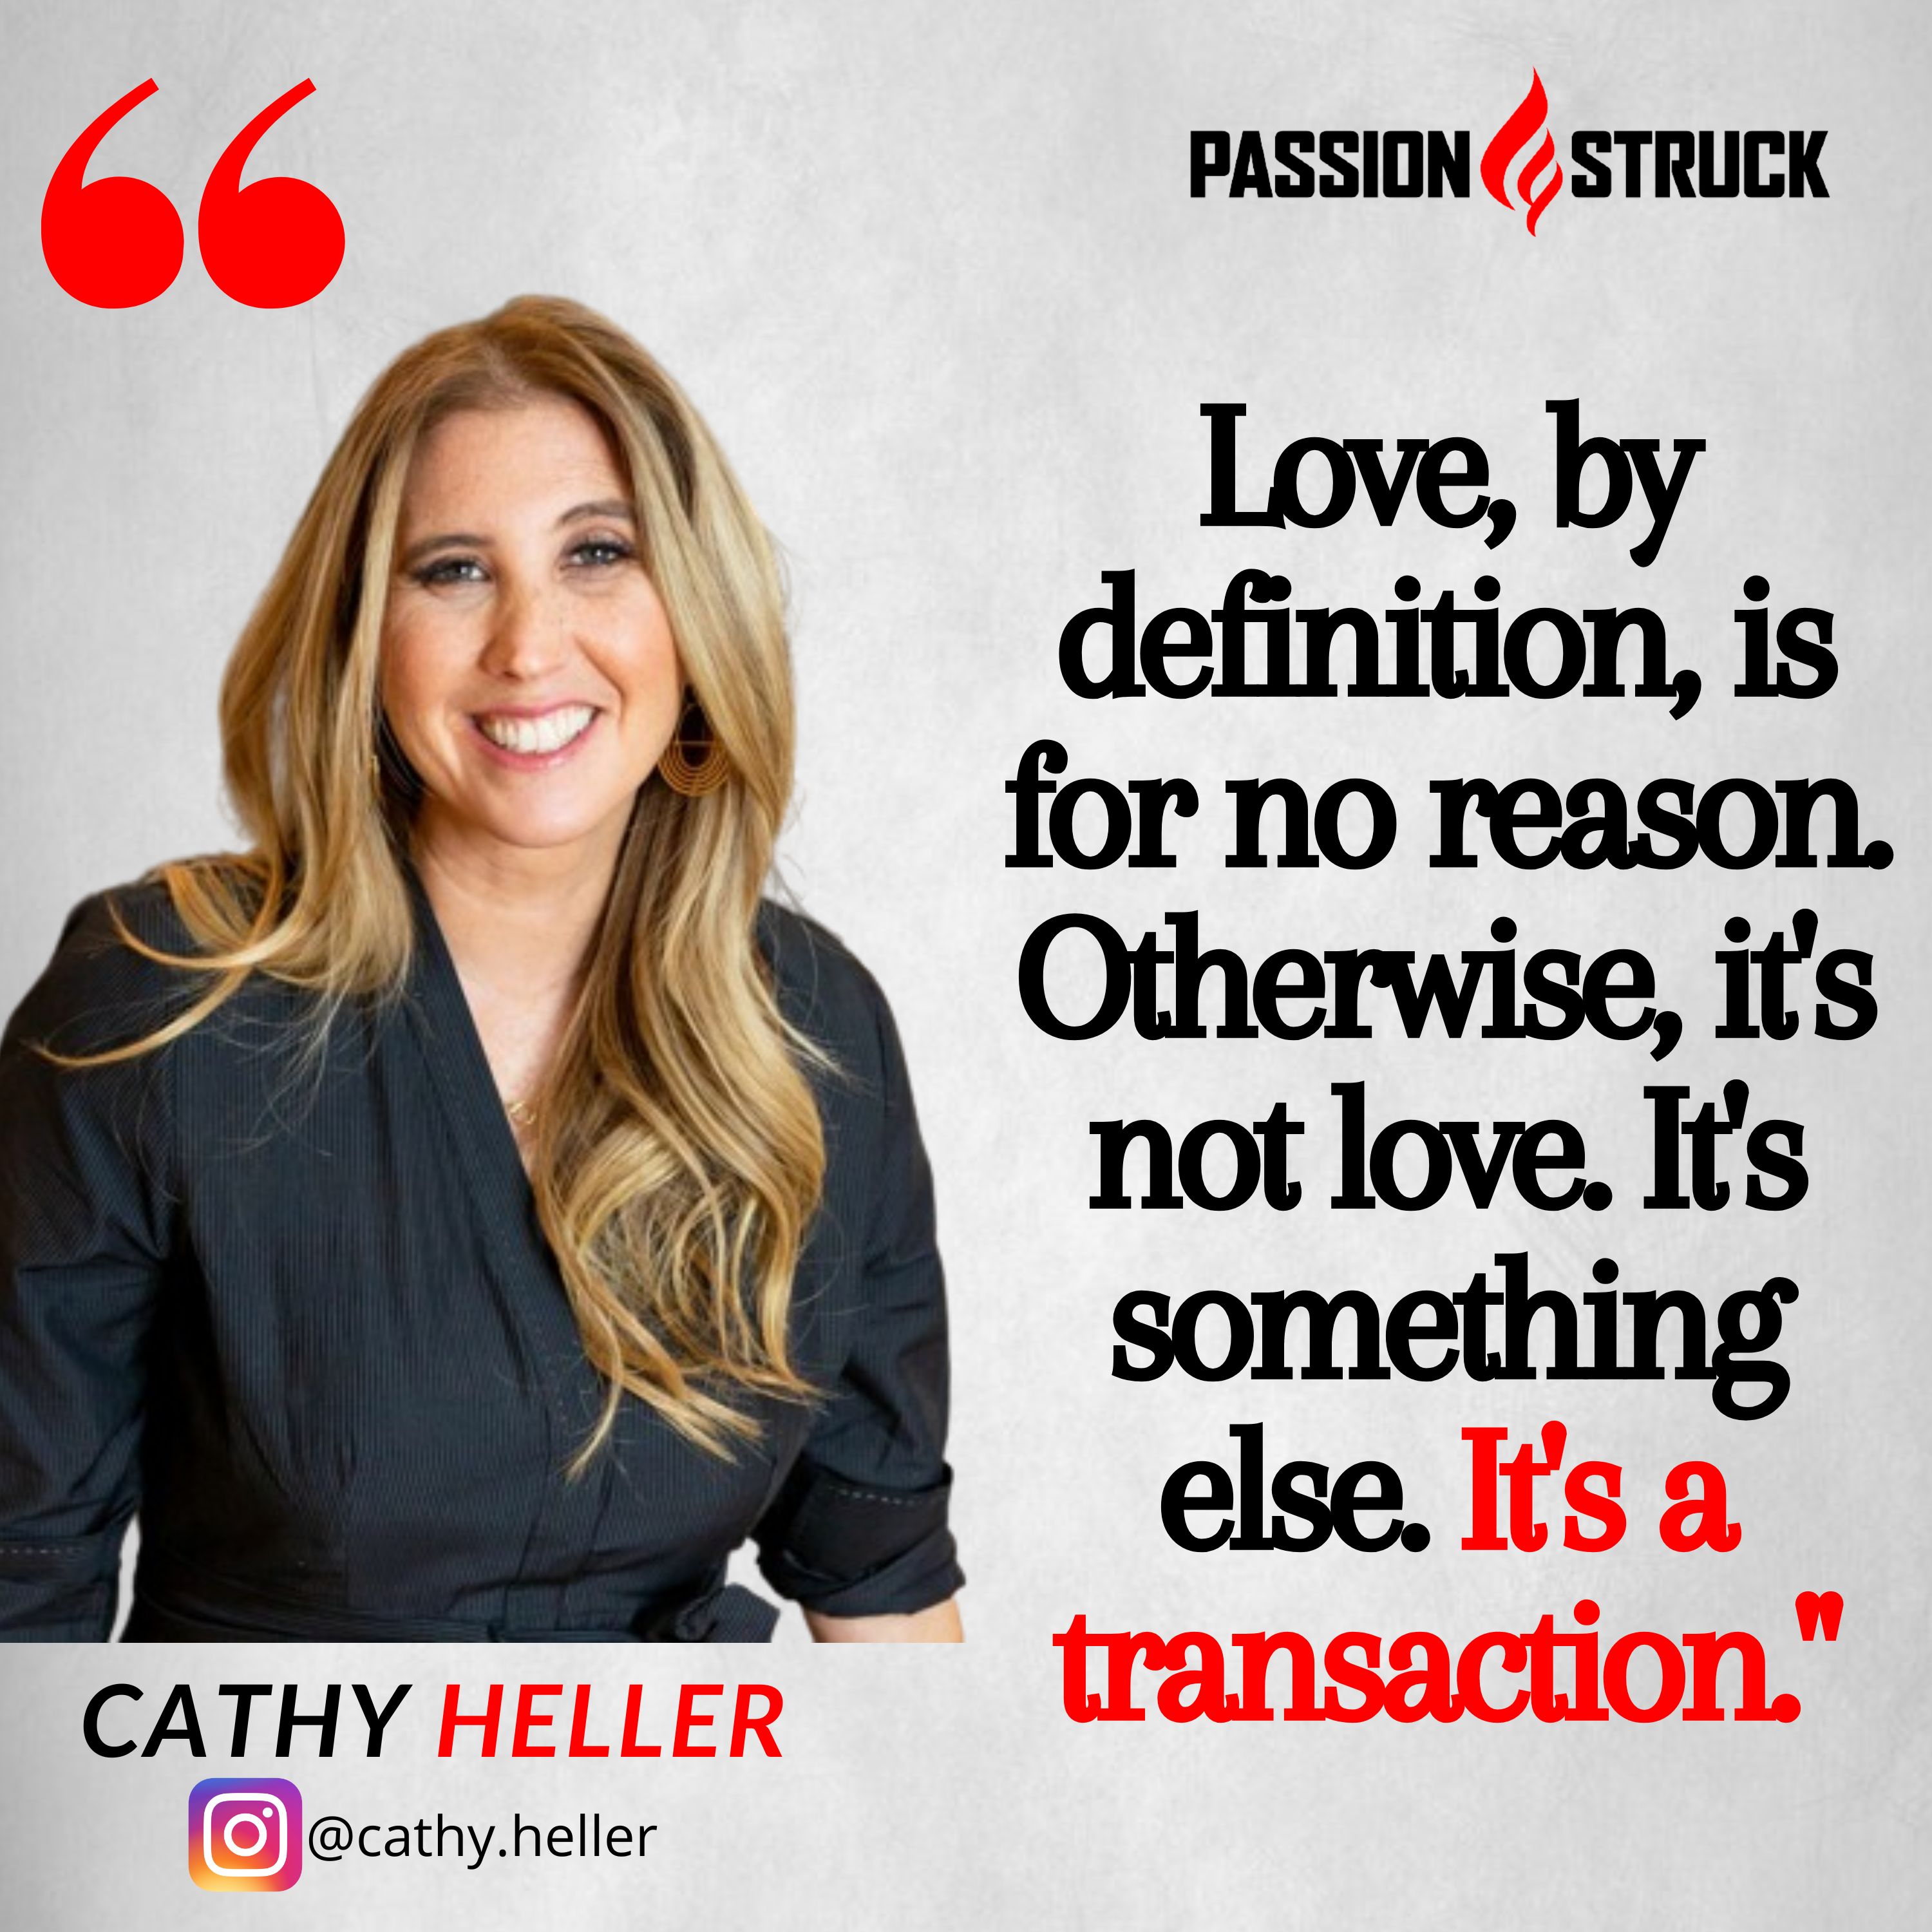 Quote by Cathy Heller: Love by definition, is for no reason for passion struck